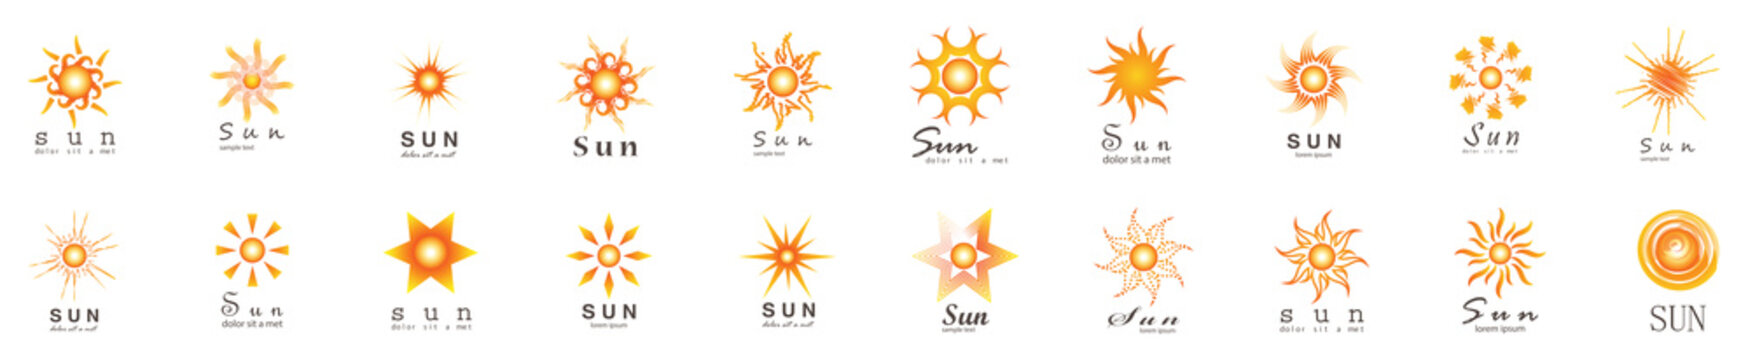 Abstract Sun Logo And Icon Set - Isolated On White Background, Vector Illustration. Abstract Sun Logo And Icons For Solar Energy Logo And Sunburst Icon Design. Abstract Sun, Vector Illustration